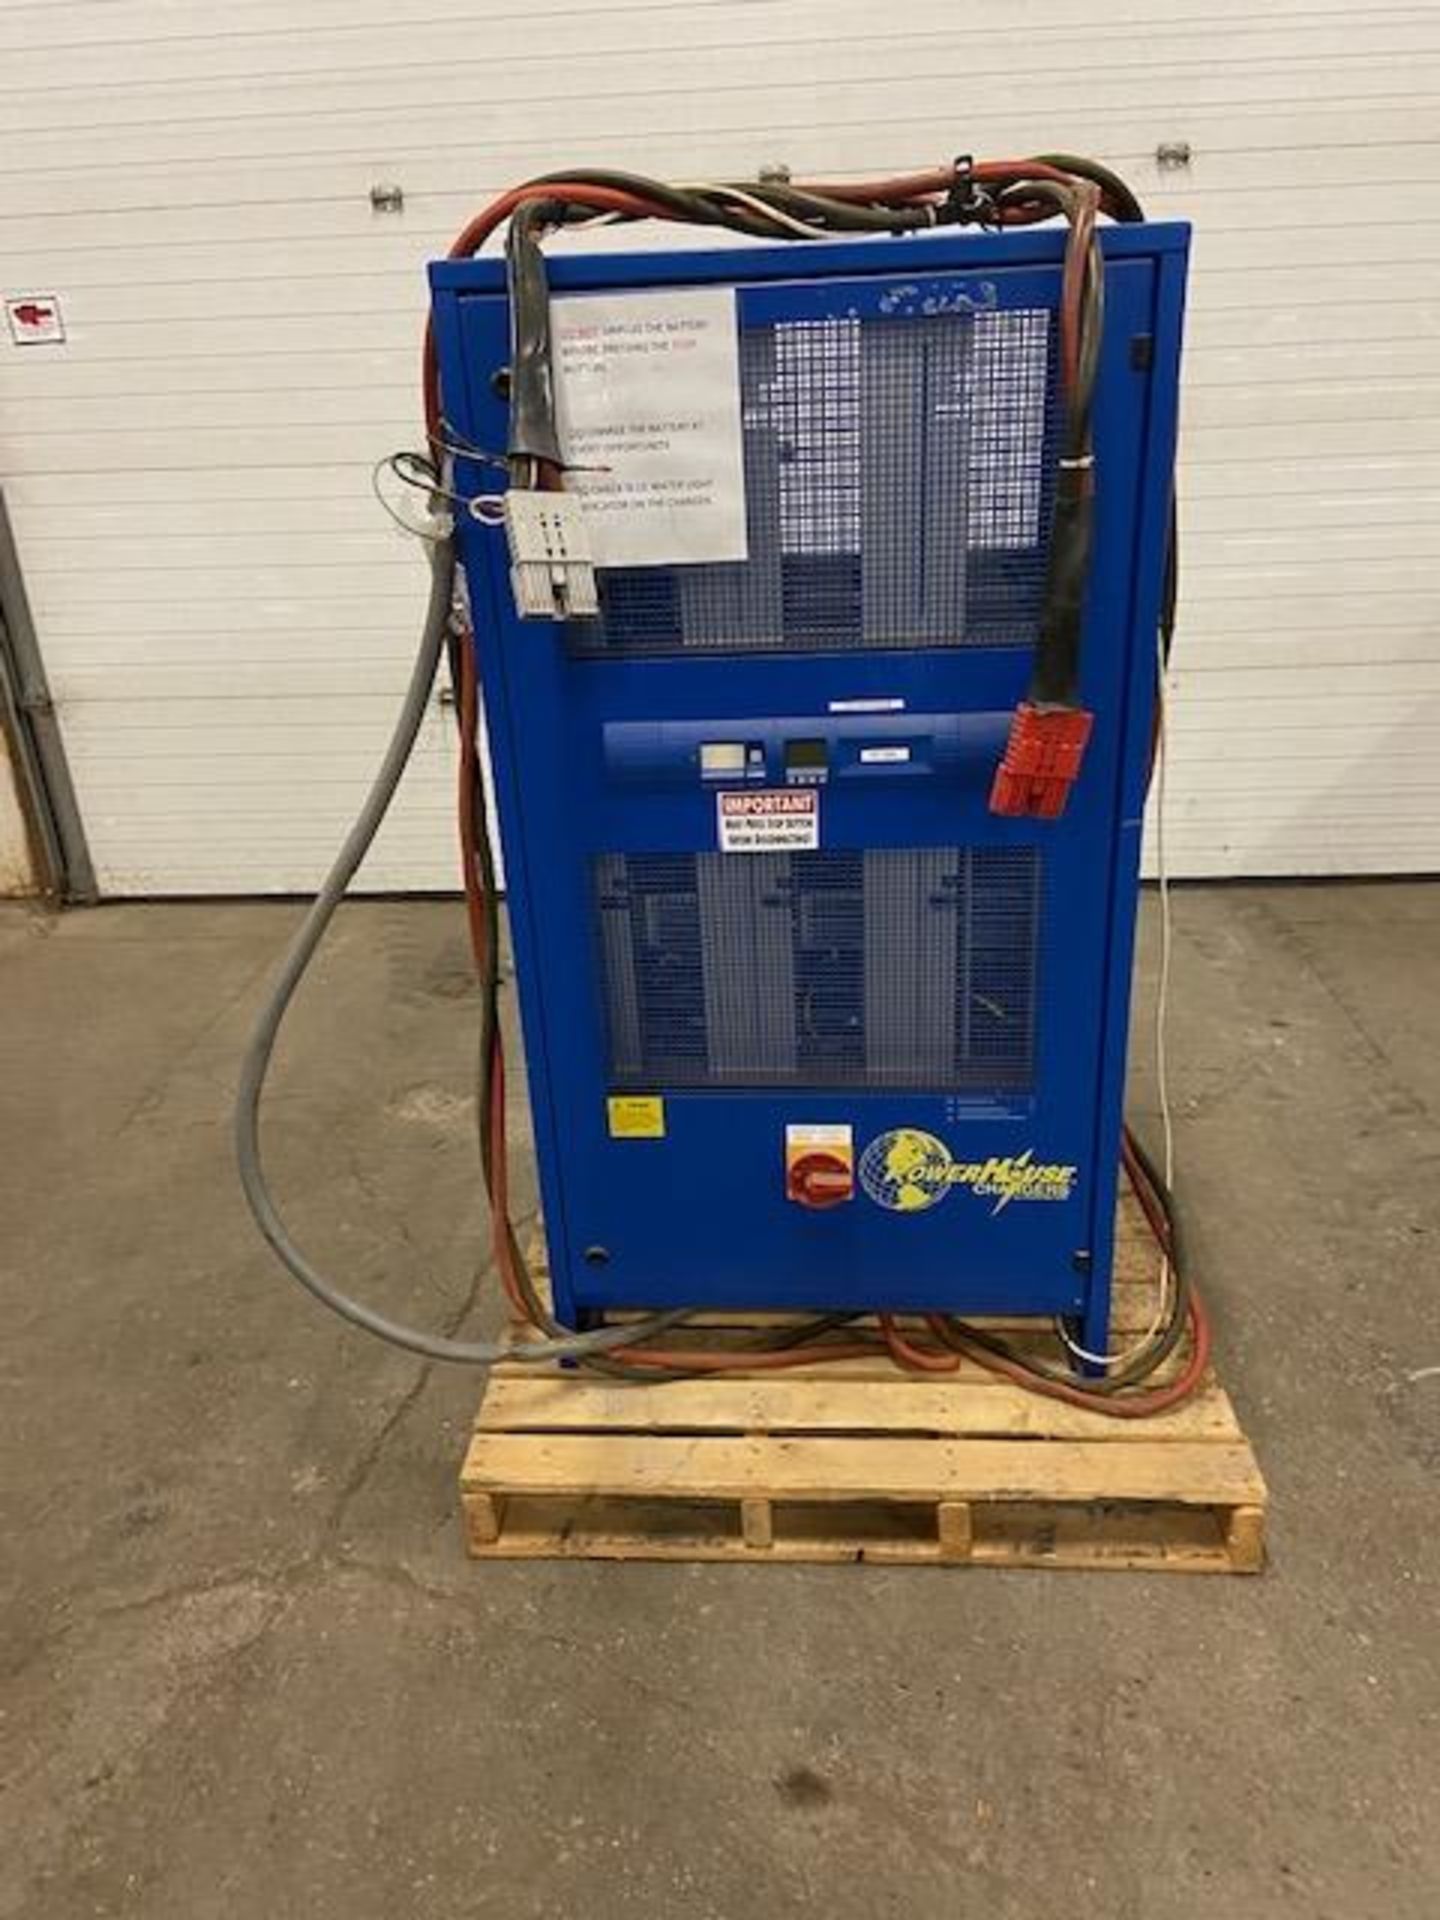 2009 CROWN Powerhouse Charger 36V Charge 2 units at once! - DUAL charging station - forklift battery